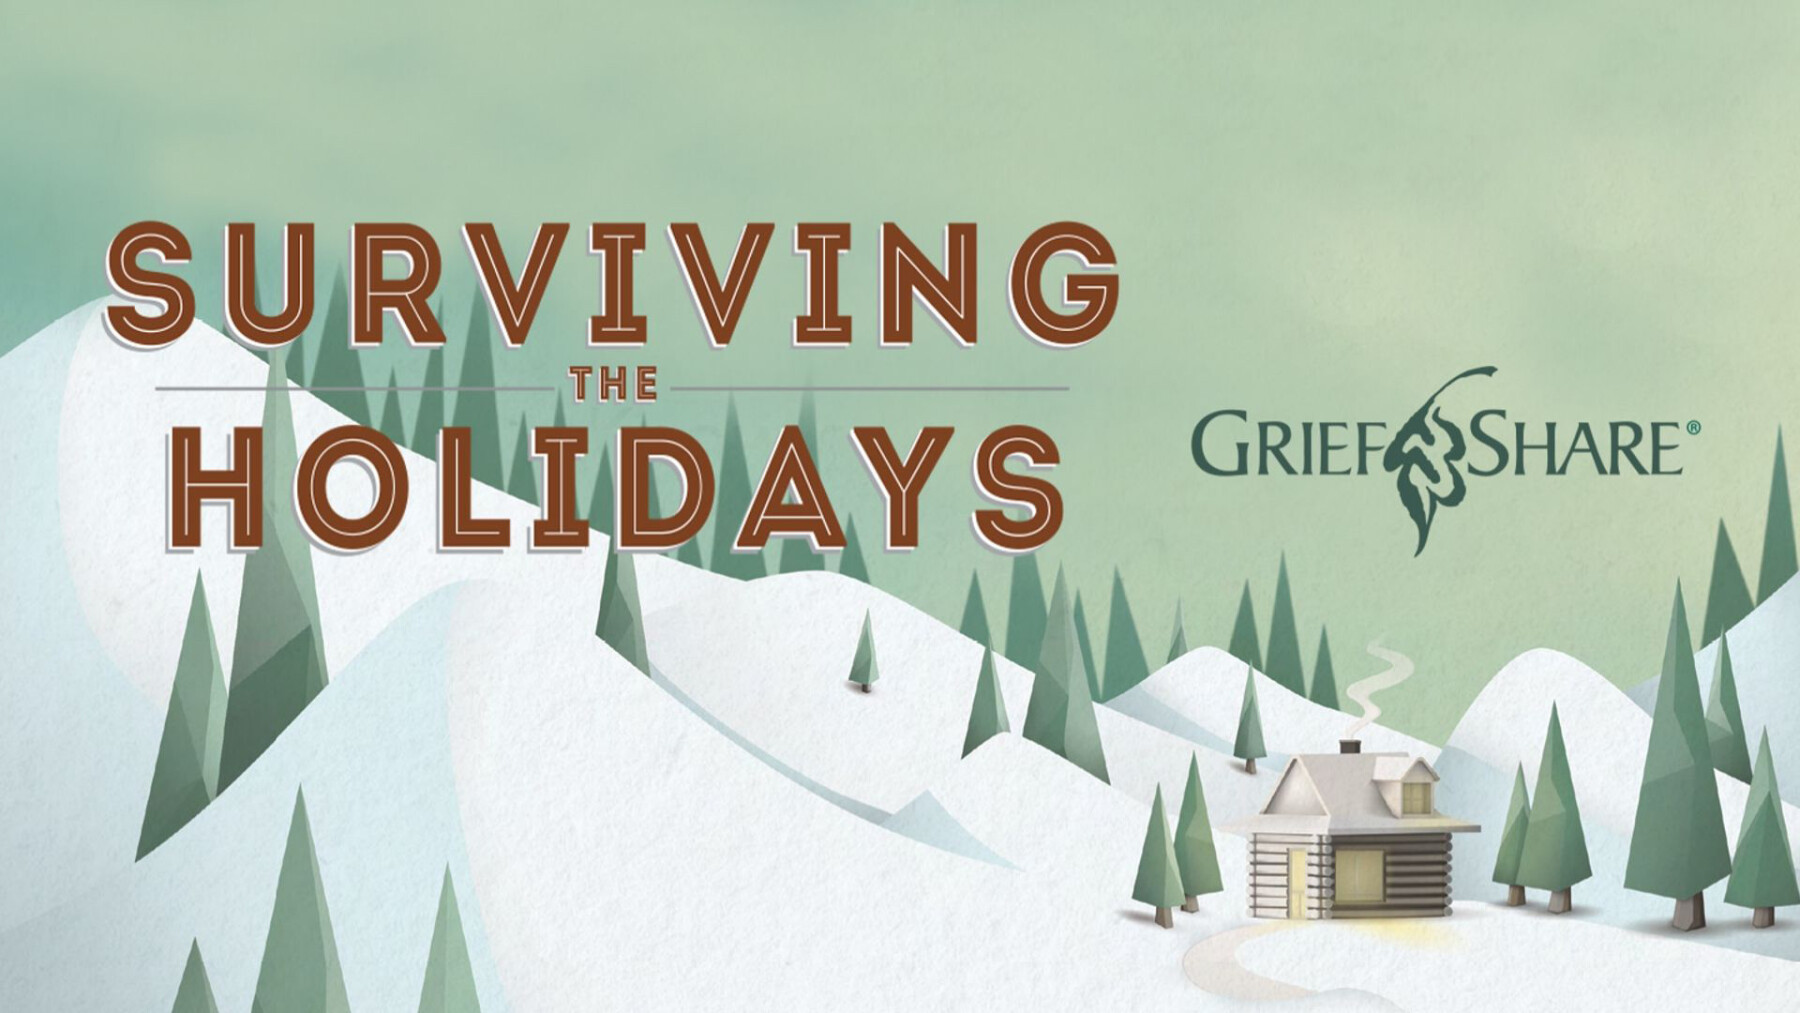 GriefShare - Surviving the Holidays